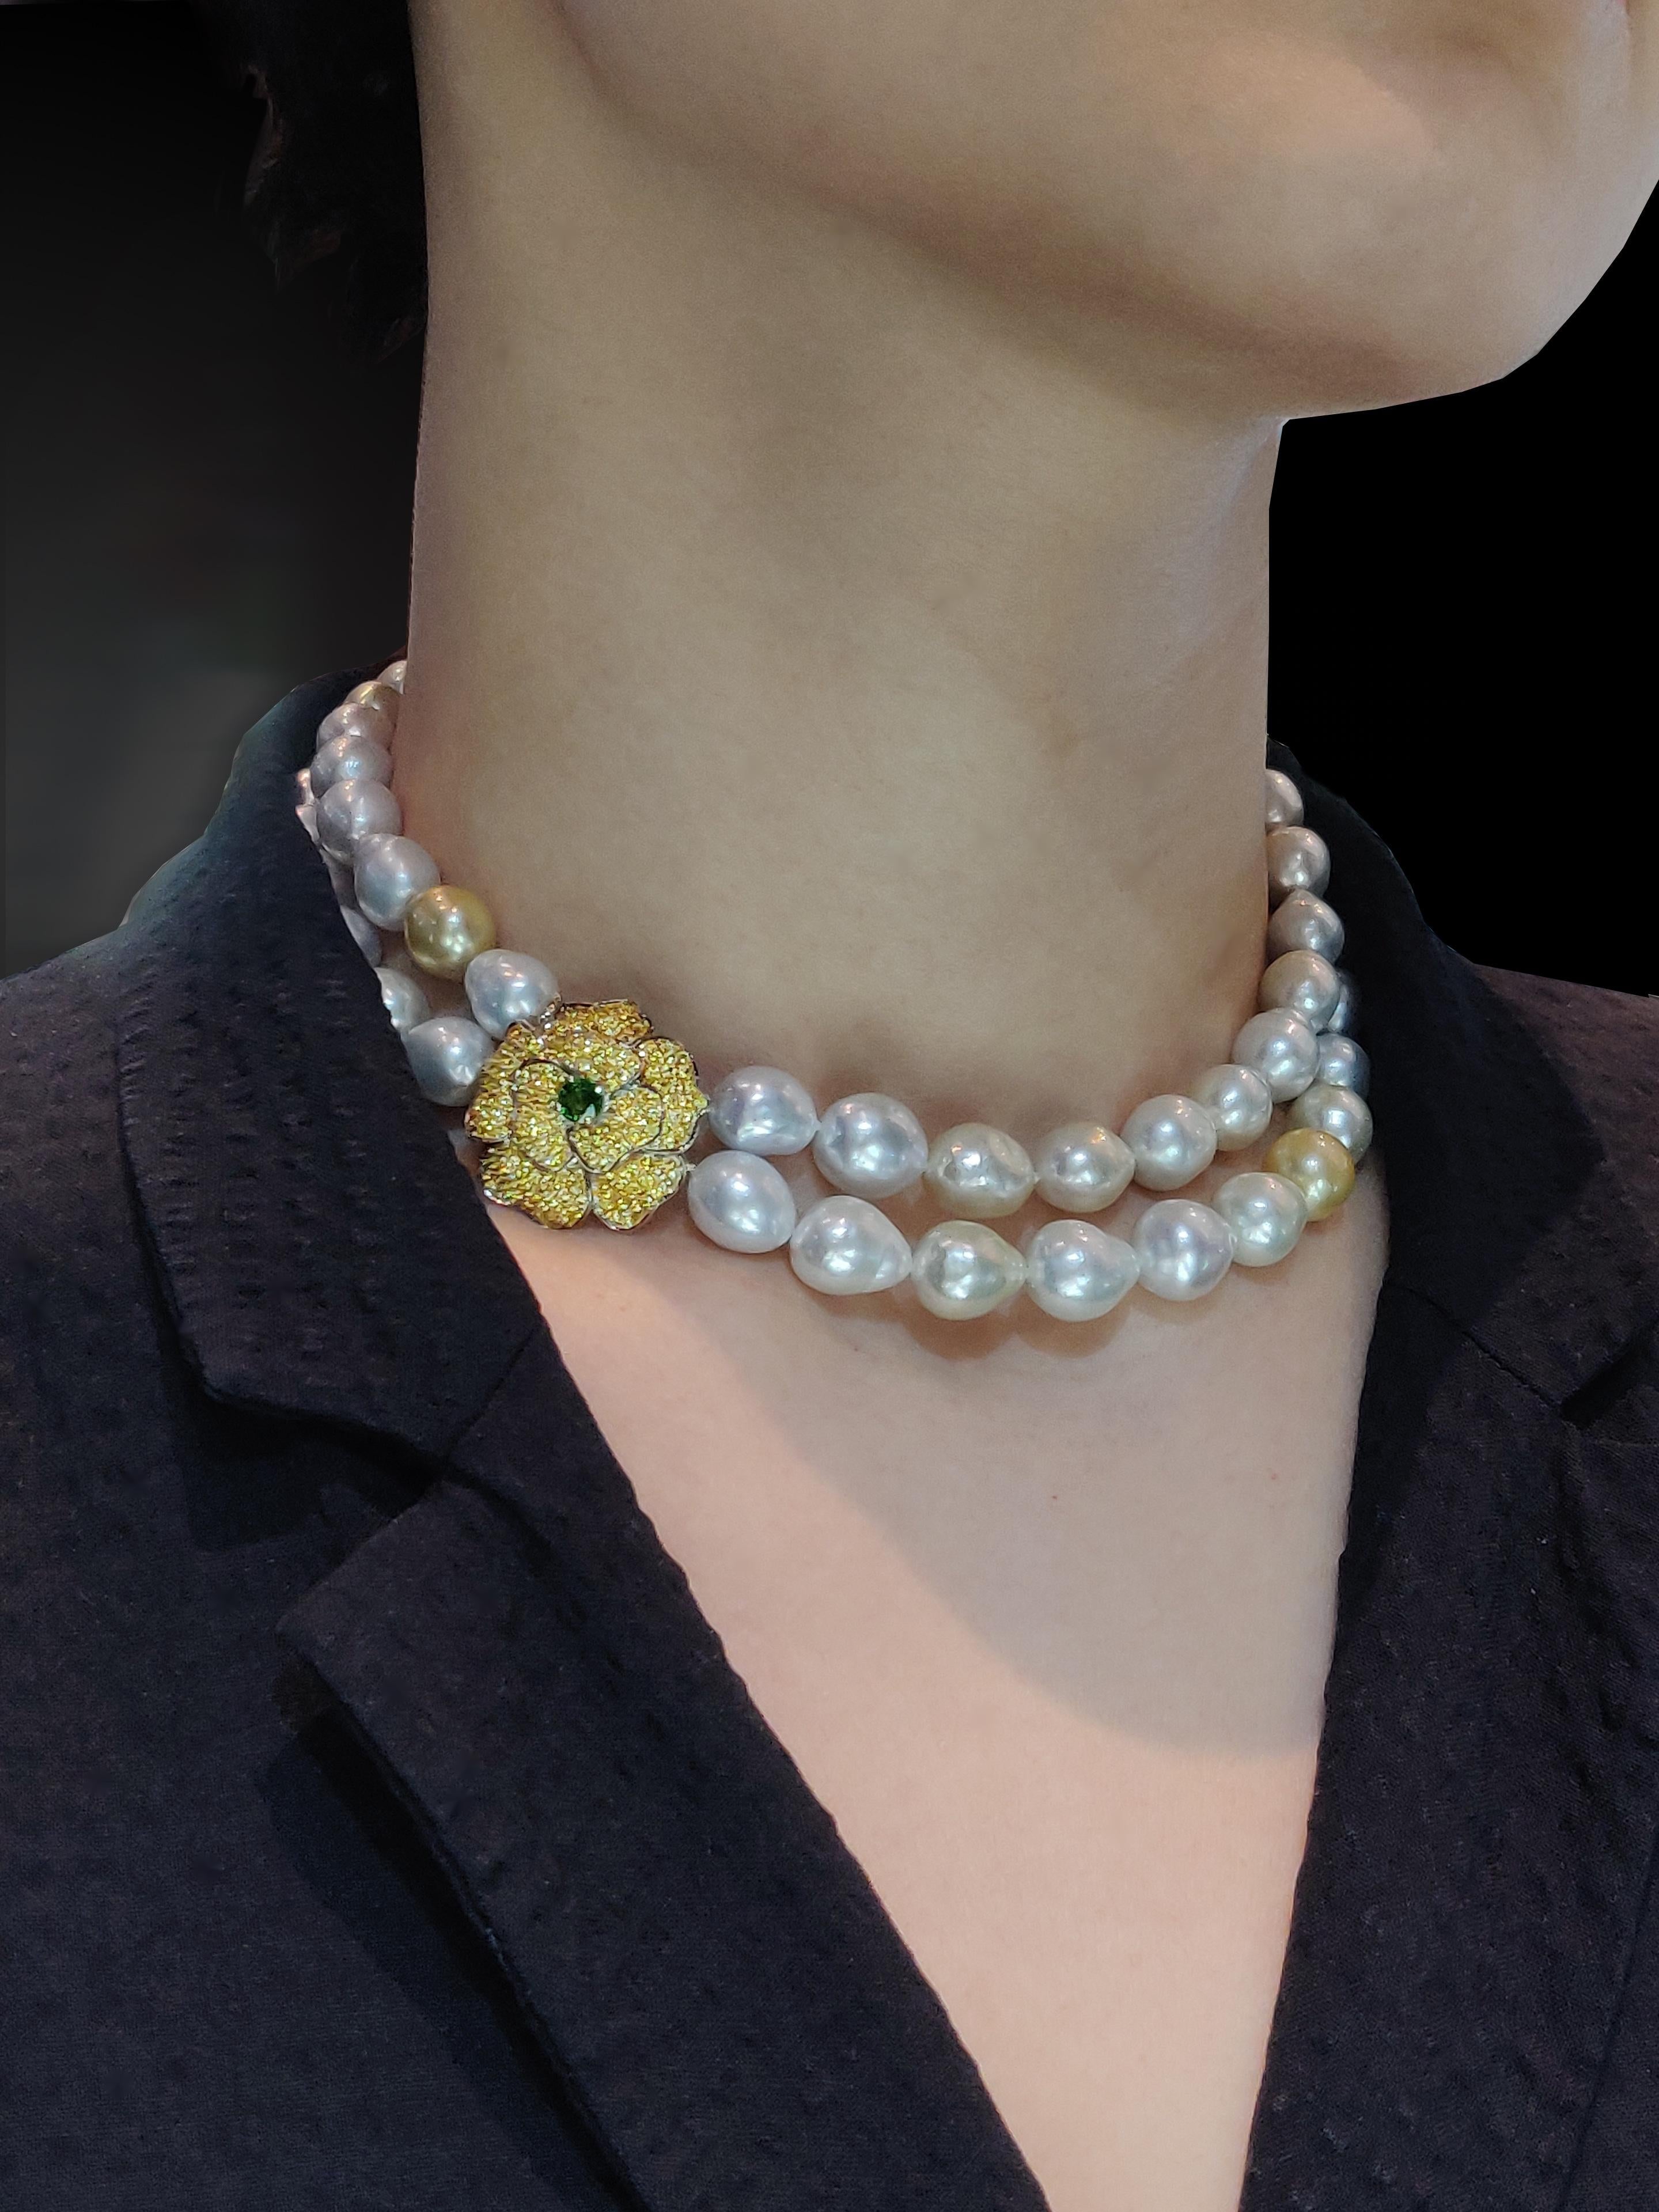 Double Strand Baroque Golden and Silver South Sea Pearl Choker Necklace Embellished with Tsavorite and Yellow Sapphire Flower Motif in 18K Gold 

Gold: 18K Gold, 14.04 g
Yellow Sapphire: 3.47 ct
Tsavorite: 0.48 ct
South Sea Pearls: 60 pieces, 9-12